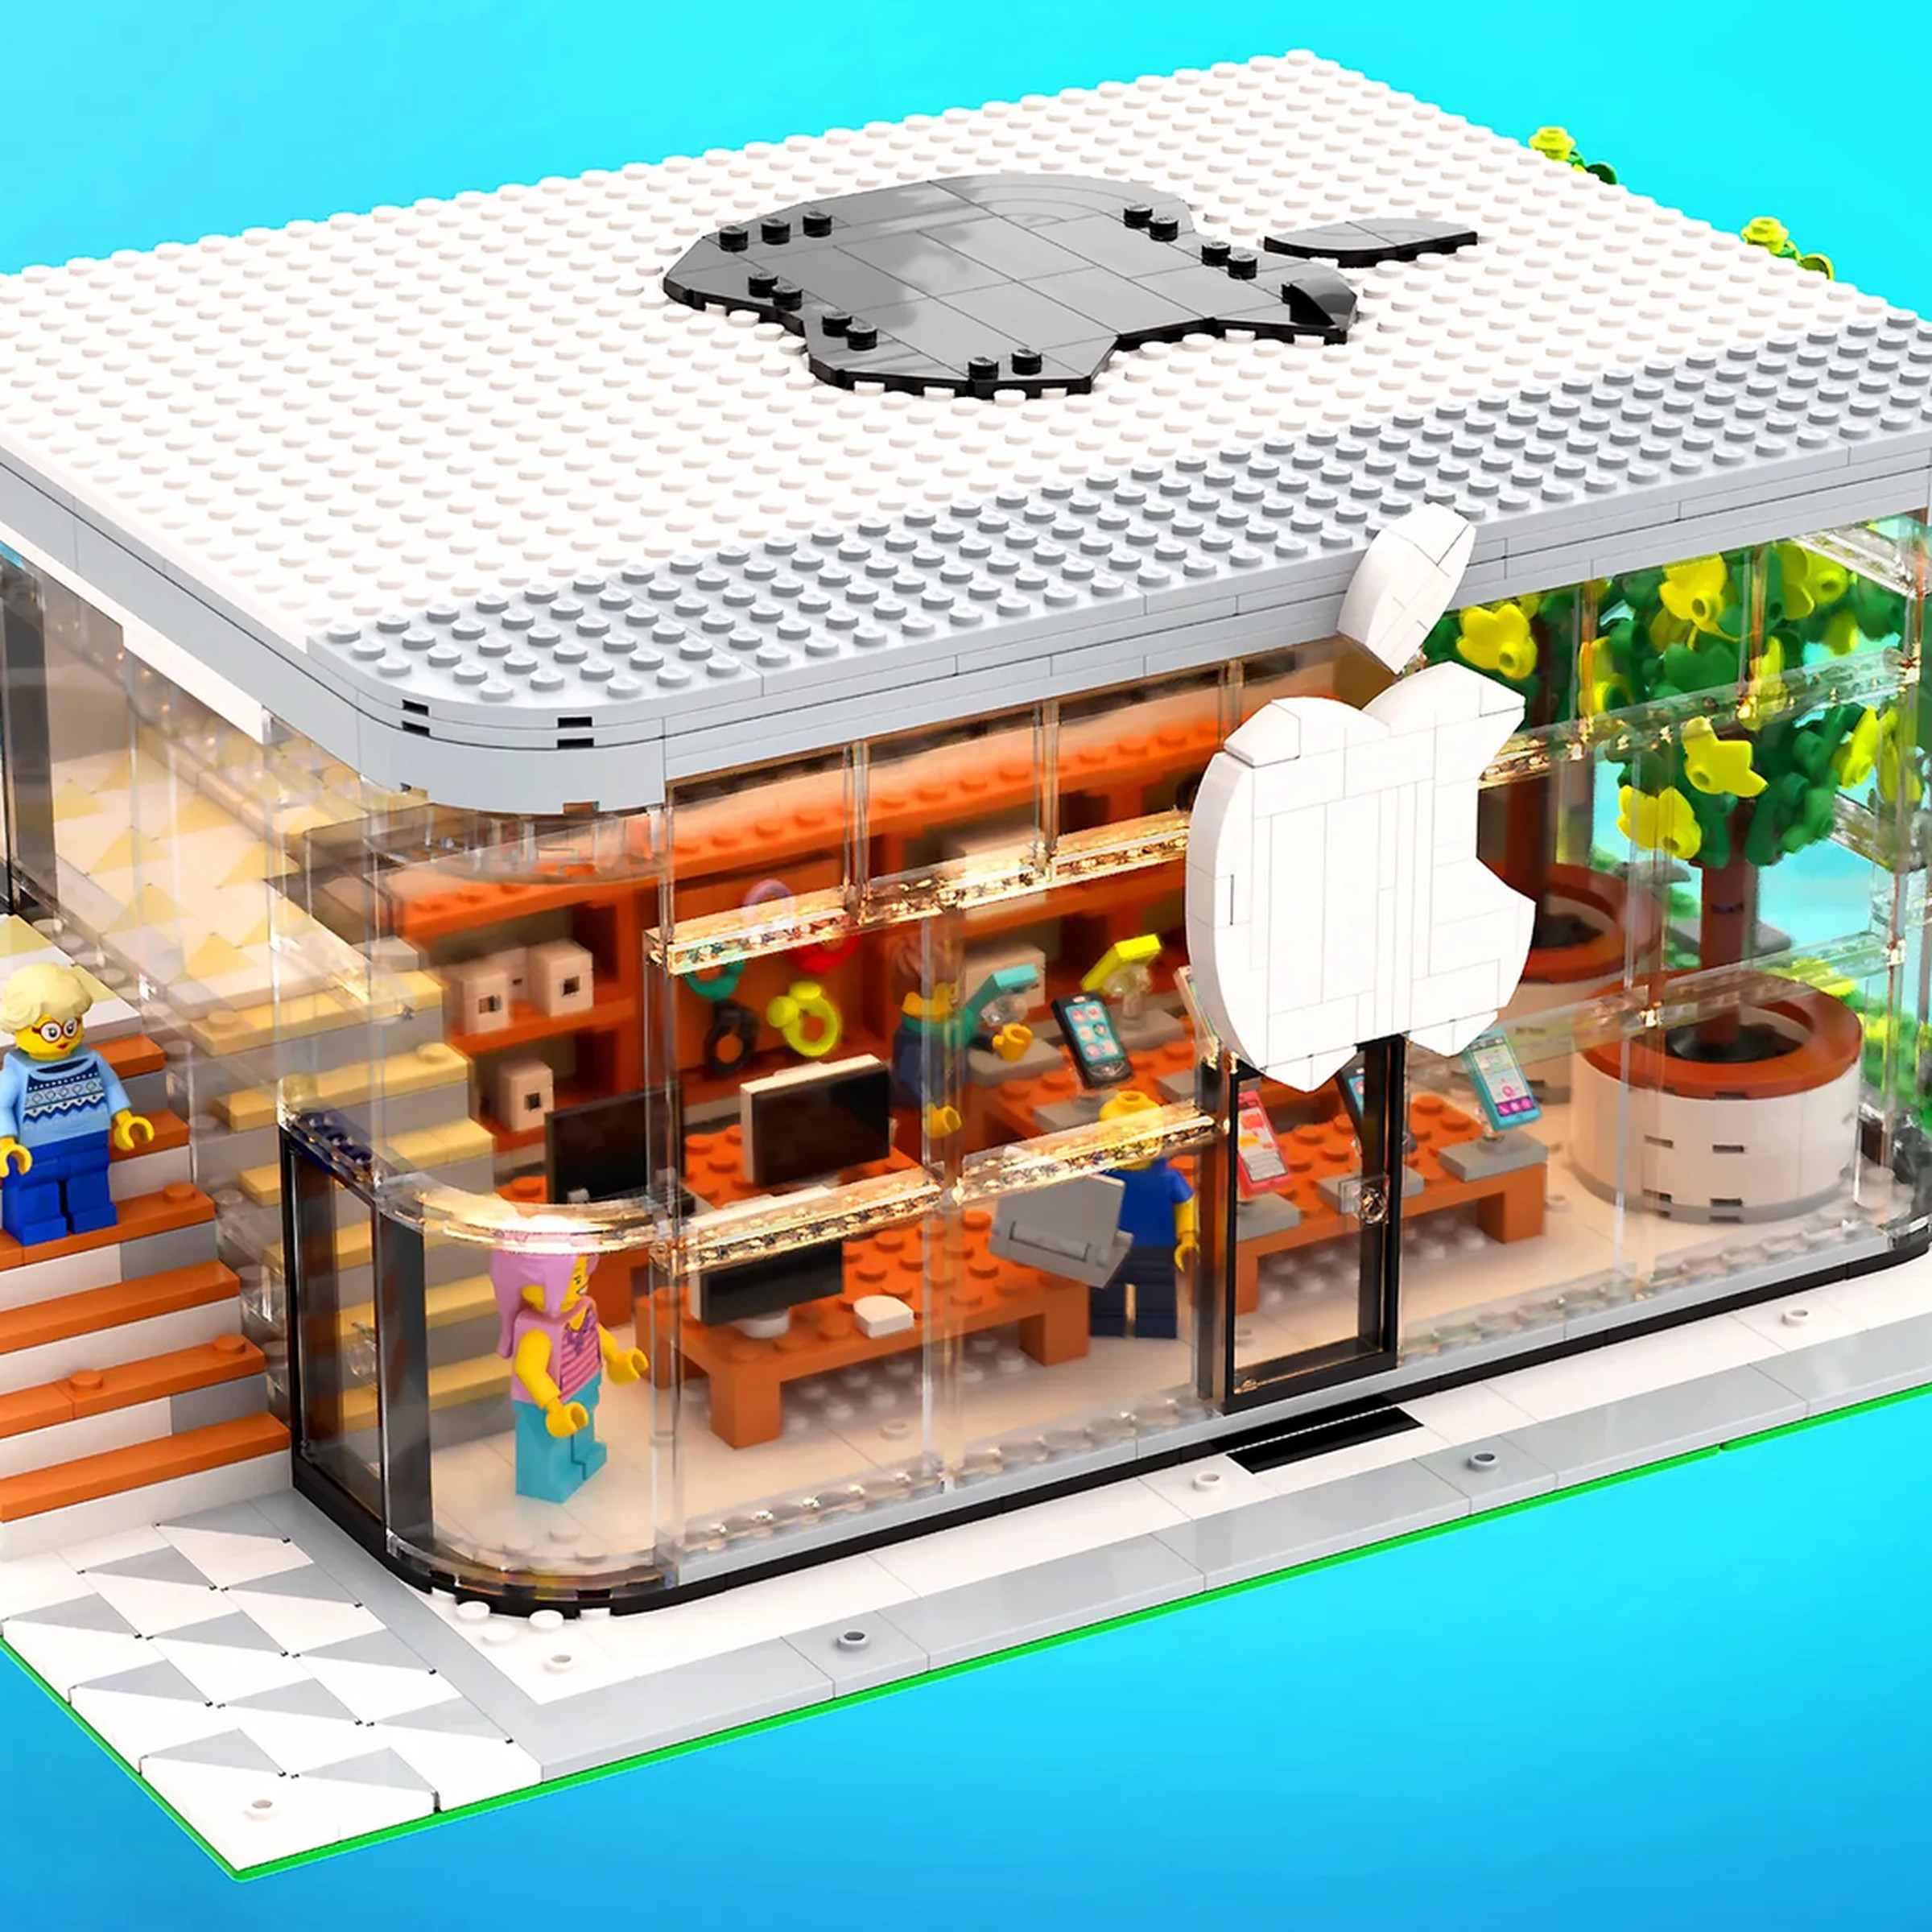 A picture of the Lego Apple Store build in its completed state.